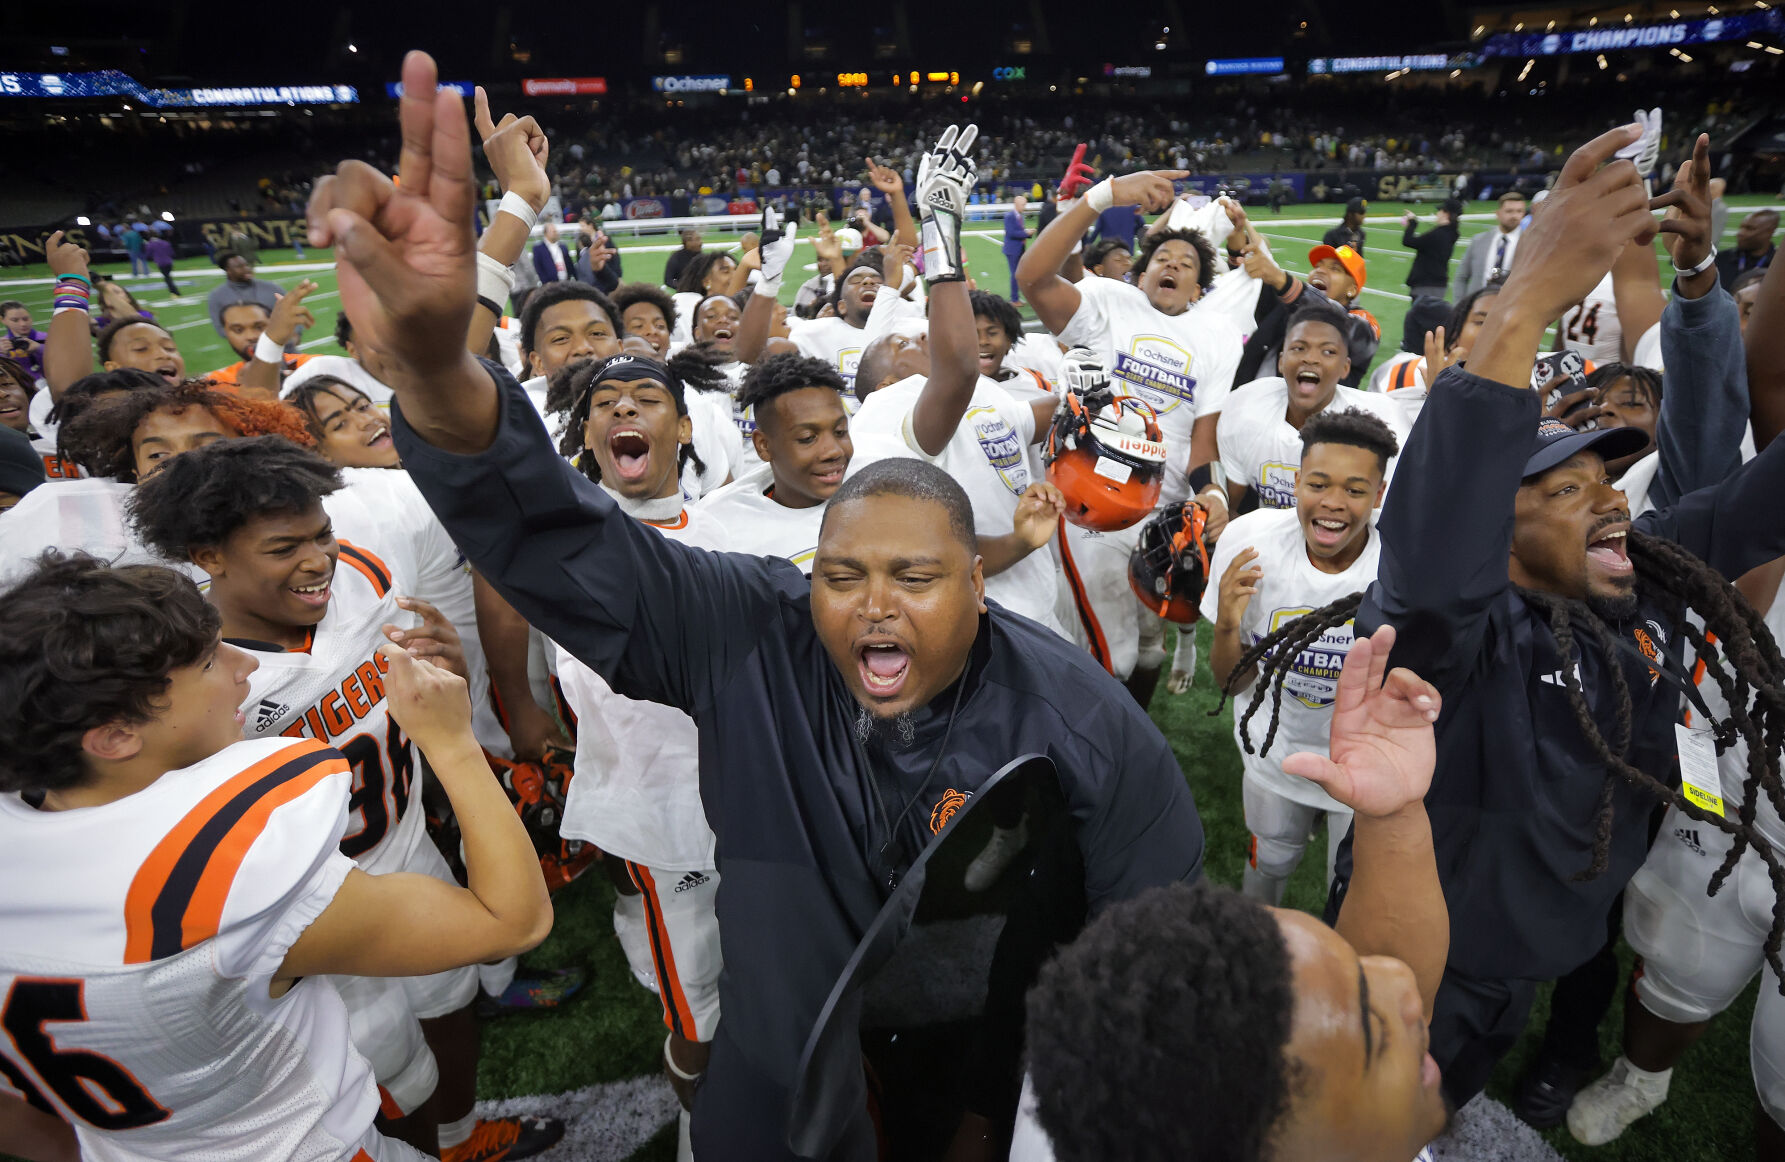 Opelousas High Tigers Football Regain State Title: Details & Reactions